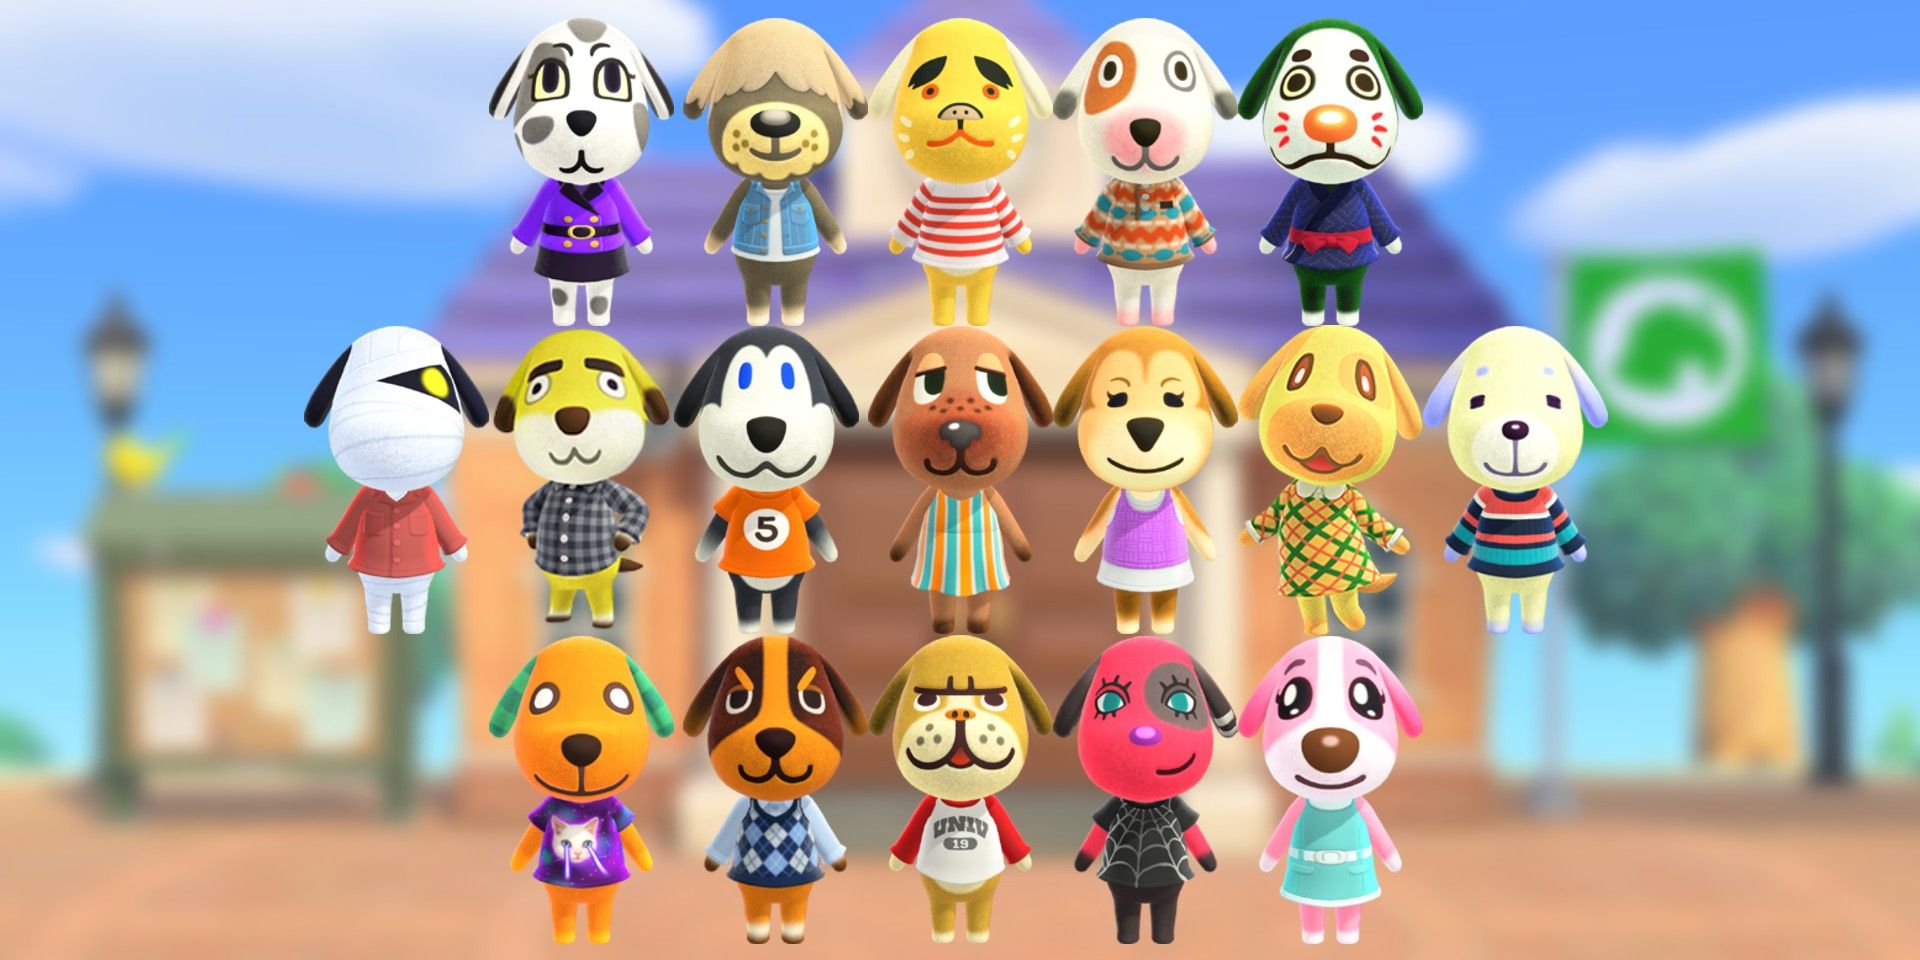 Blue Hair Villagers in Animal Crossing: New Horizons - wide 4